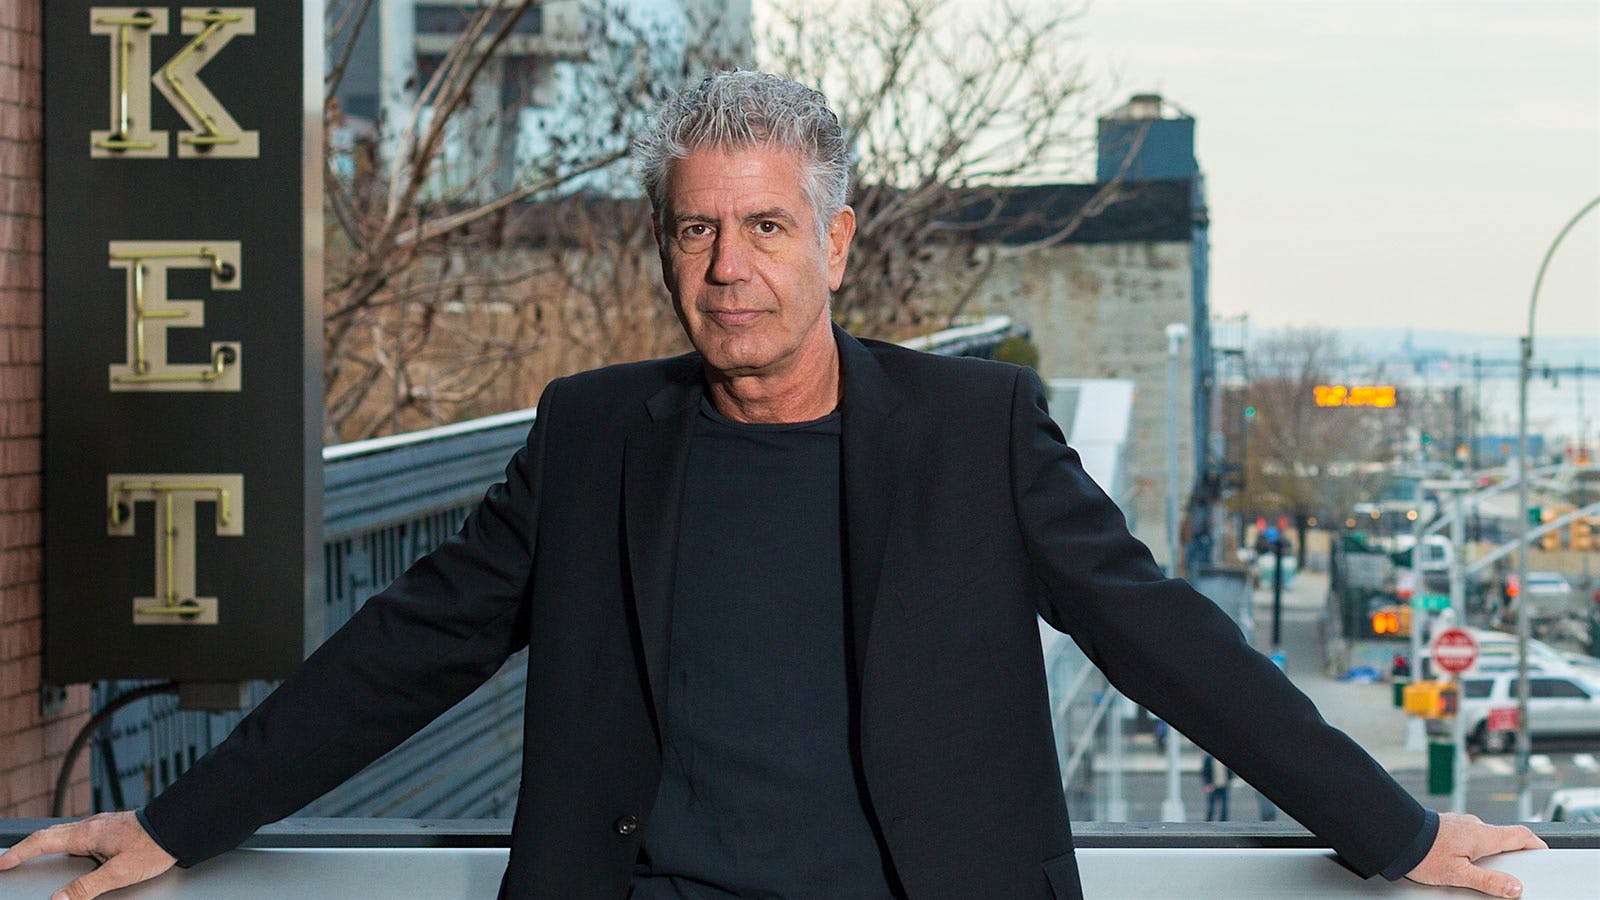 Anthony Bourdain, Chef, Author and TV Host, Dies at 61